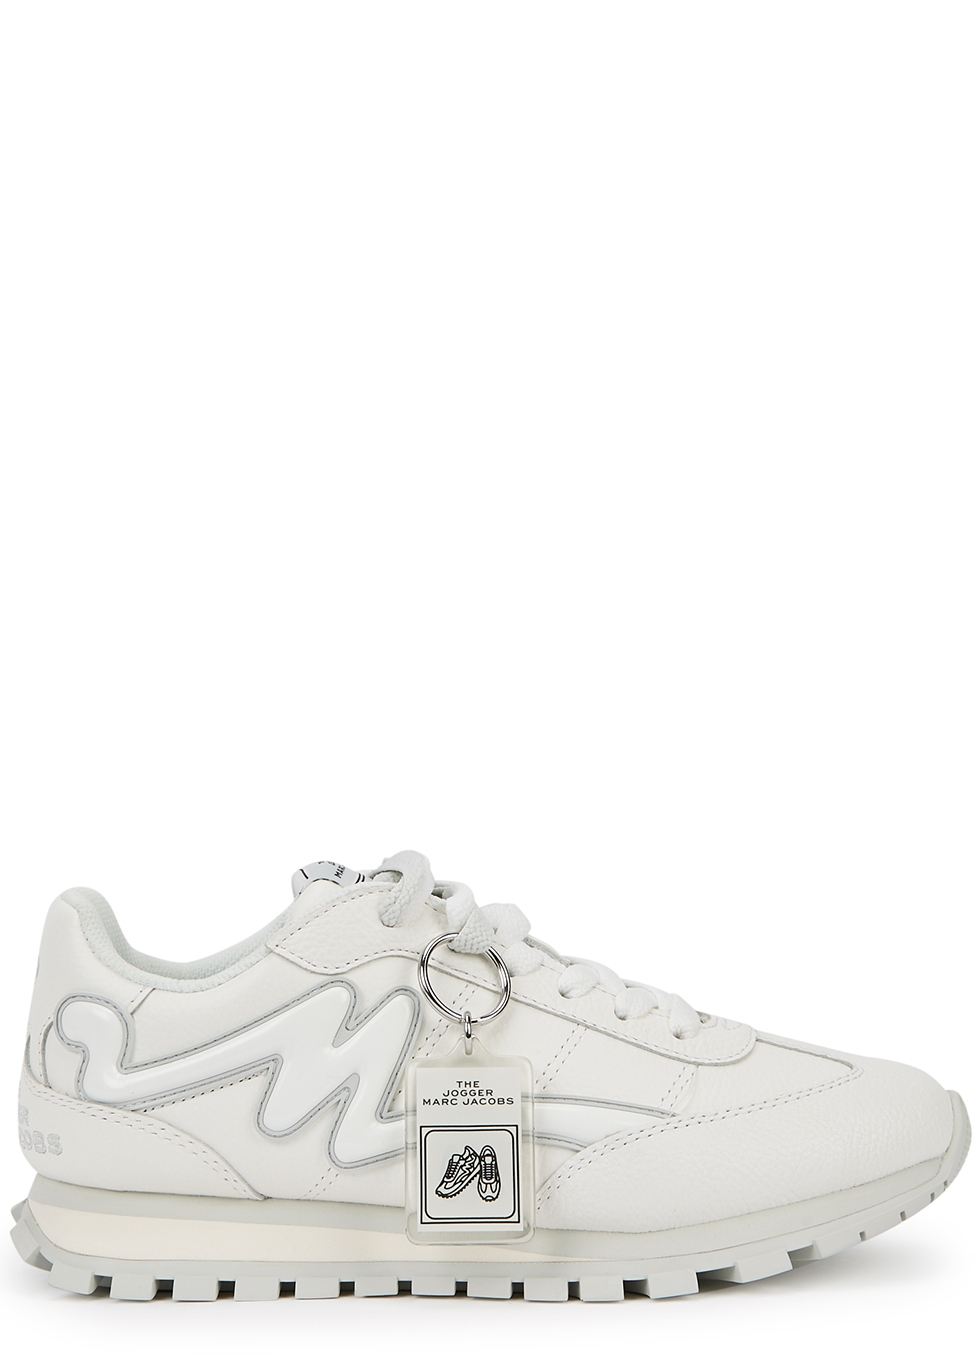 Marc Jacobs The Jogger white leather sneakers